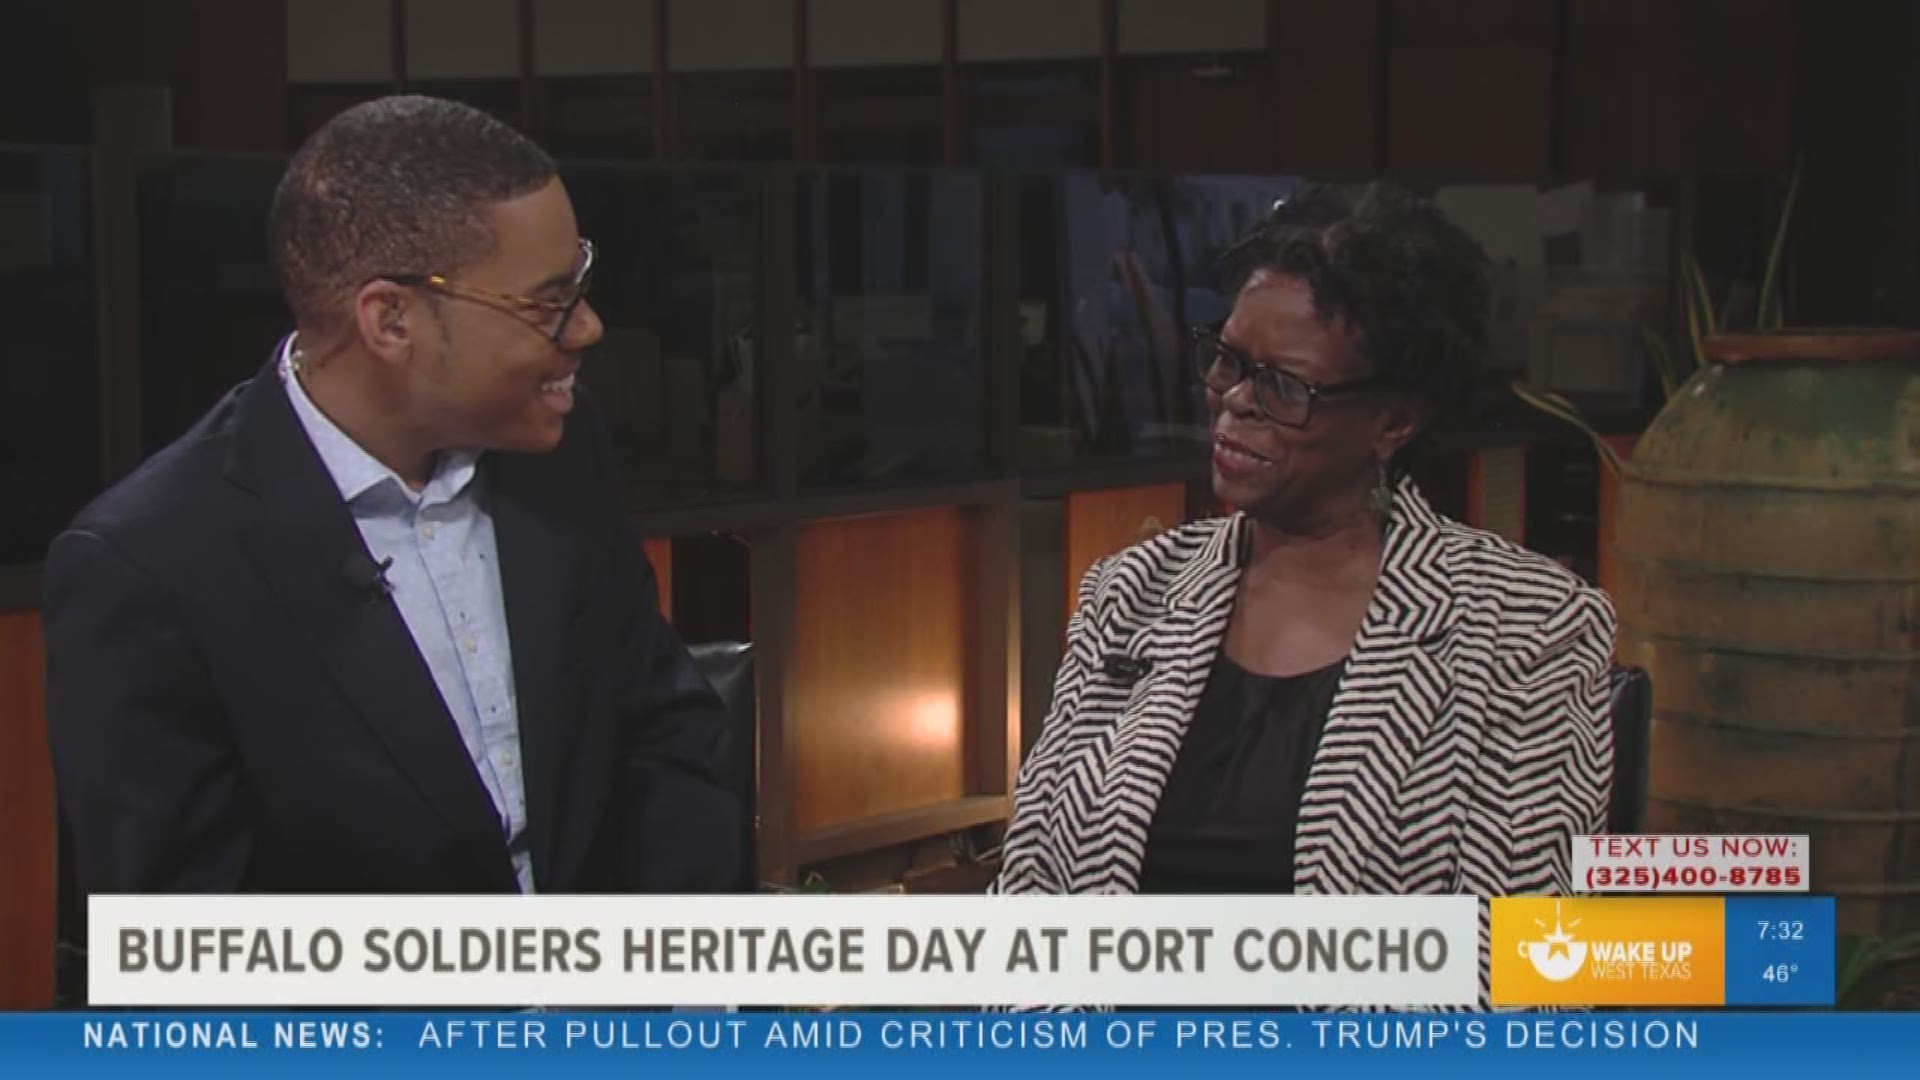 Our Malik Mingo spoke with the San Angelo chapter of the NAACP about their upcoming partnership to celebrate the Buffalo Soldiers at Fort Concho.